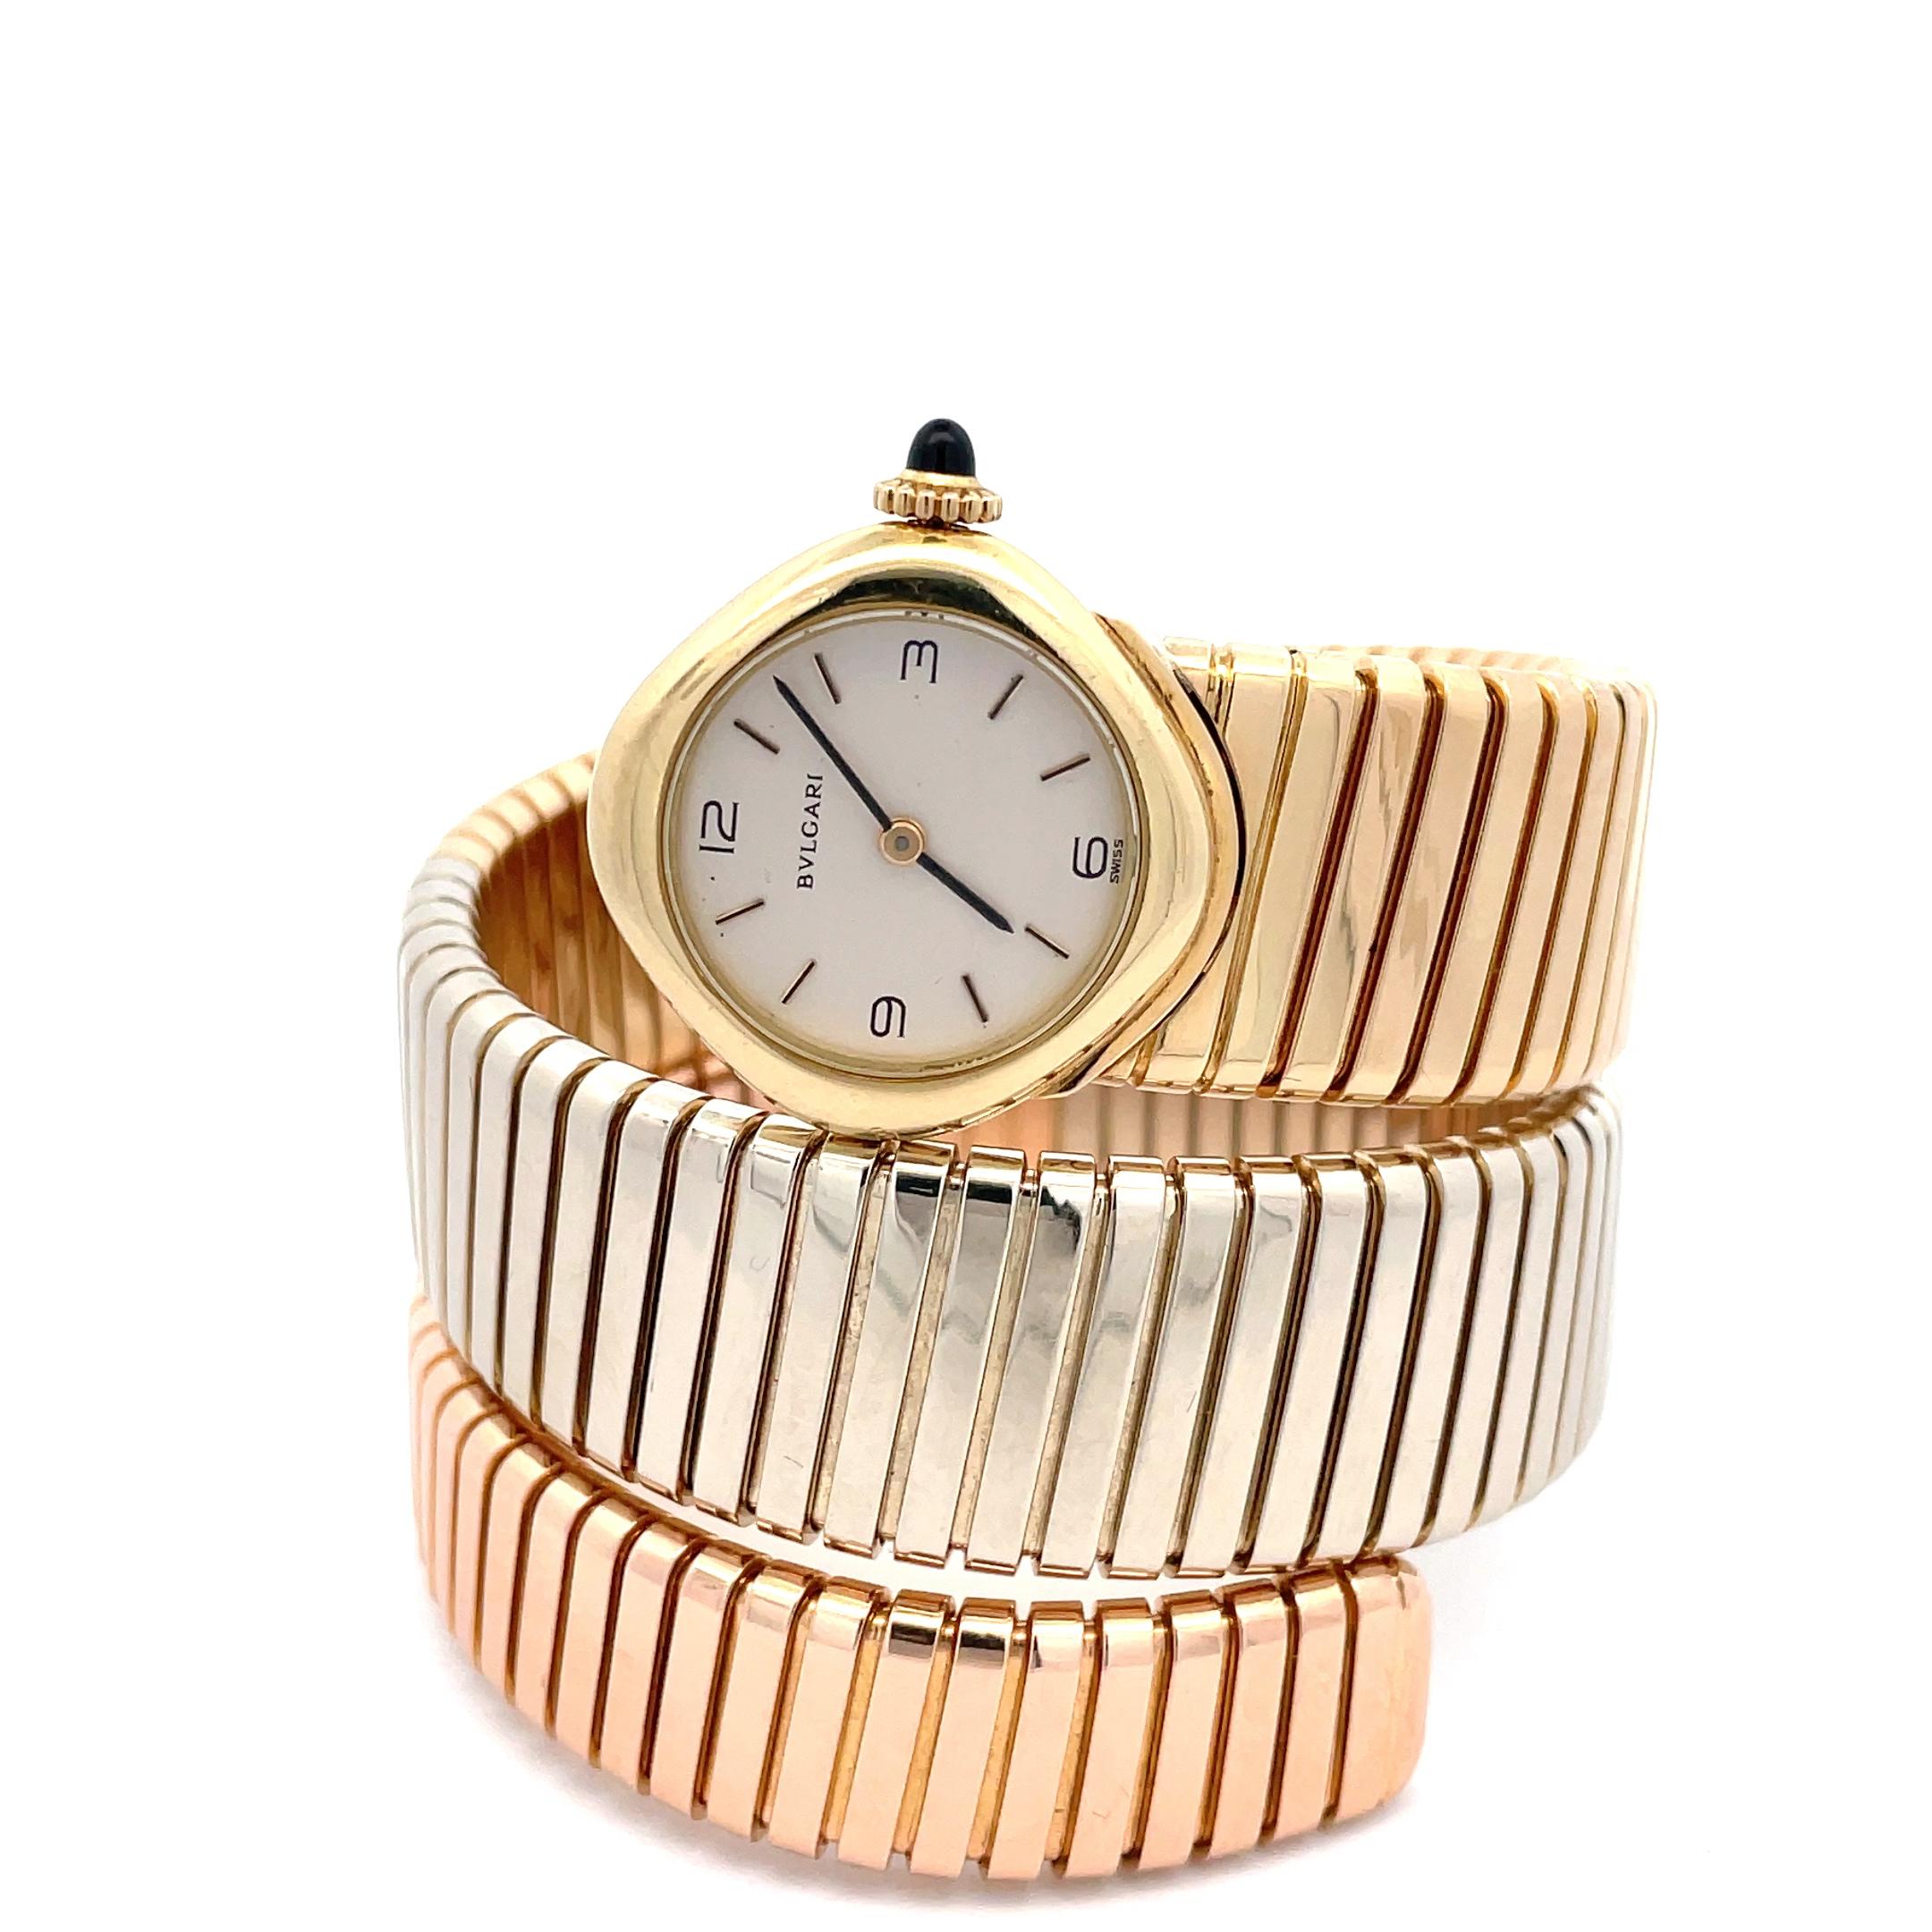 A unique version of the Bulgari Tubogas lady's watch in 18kt yellow, white and rose gold with a white dial with an elegant cabochon sapphire crown. Those large version of the Tubogas by Bulgari are among the rarest and most collectibles, fun fact in